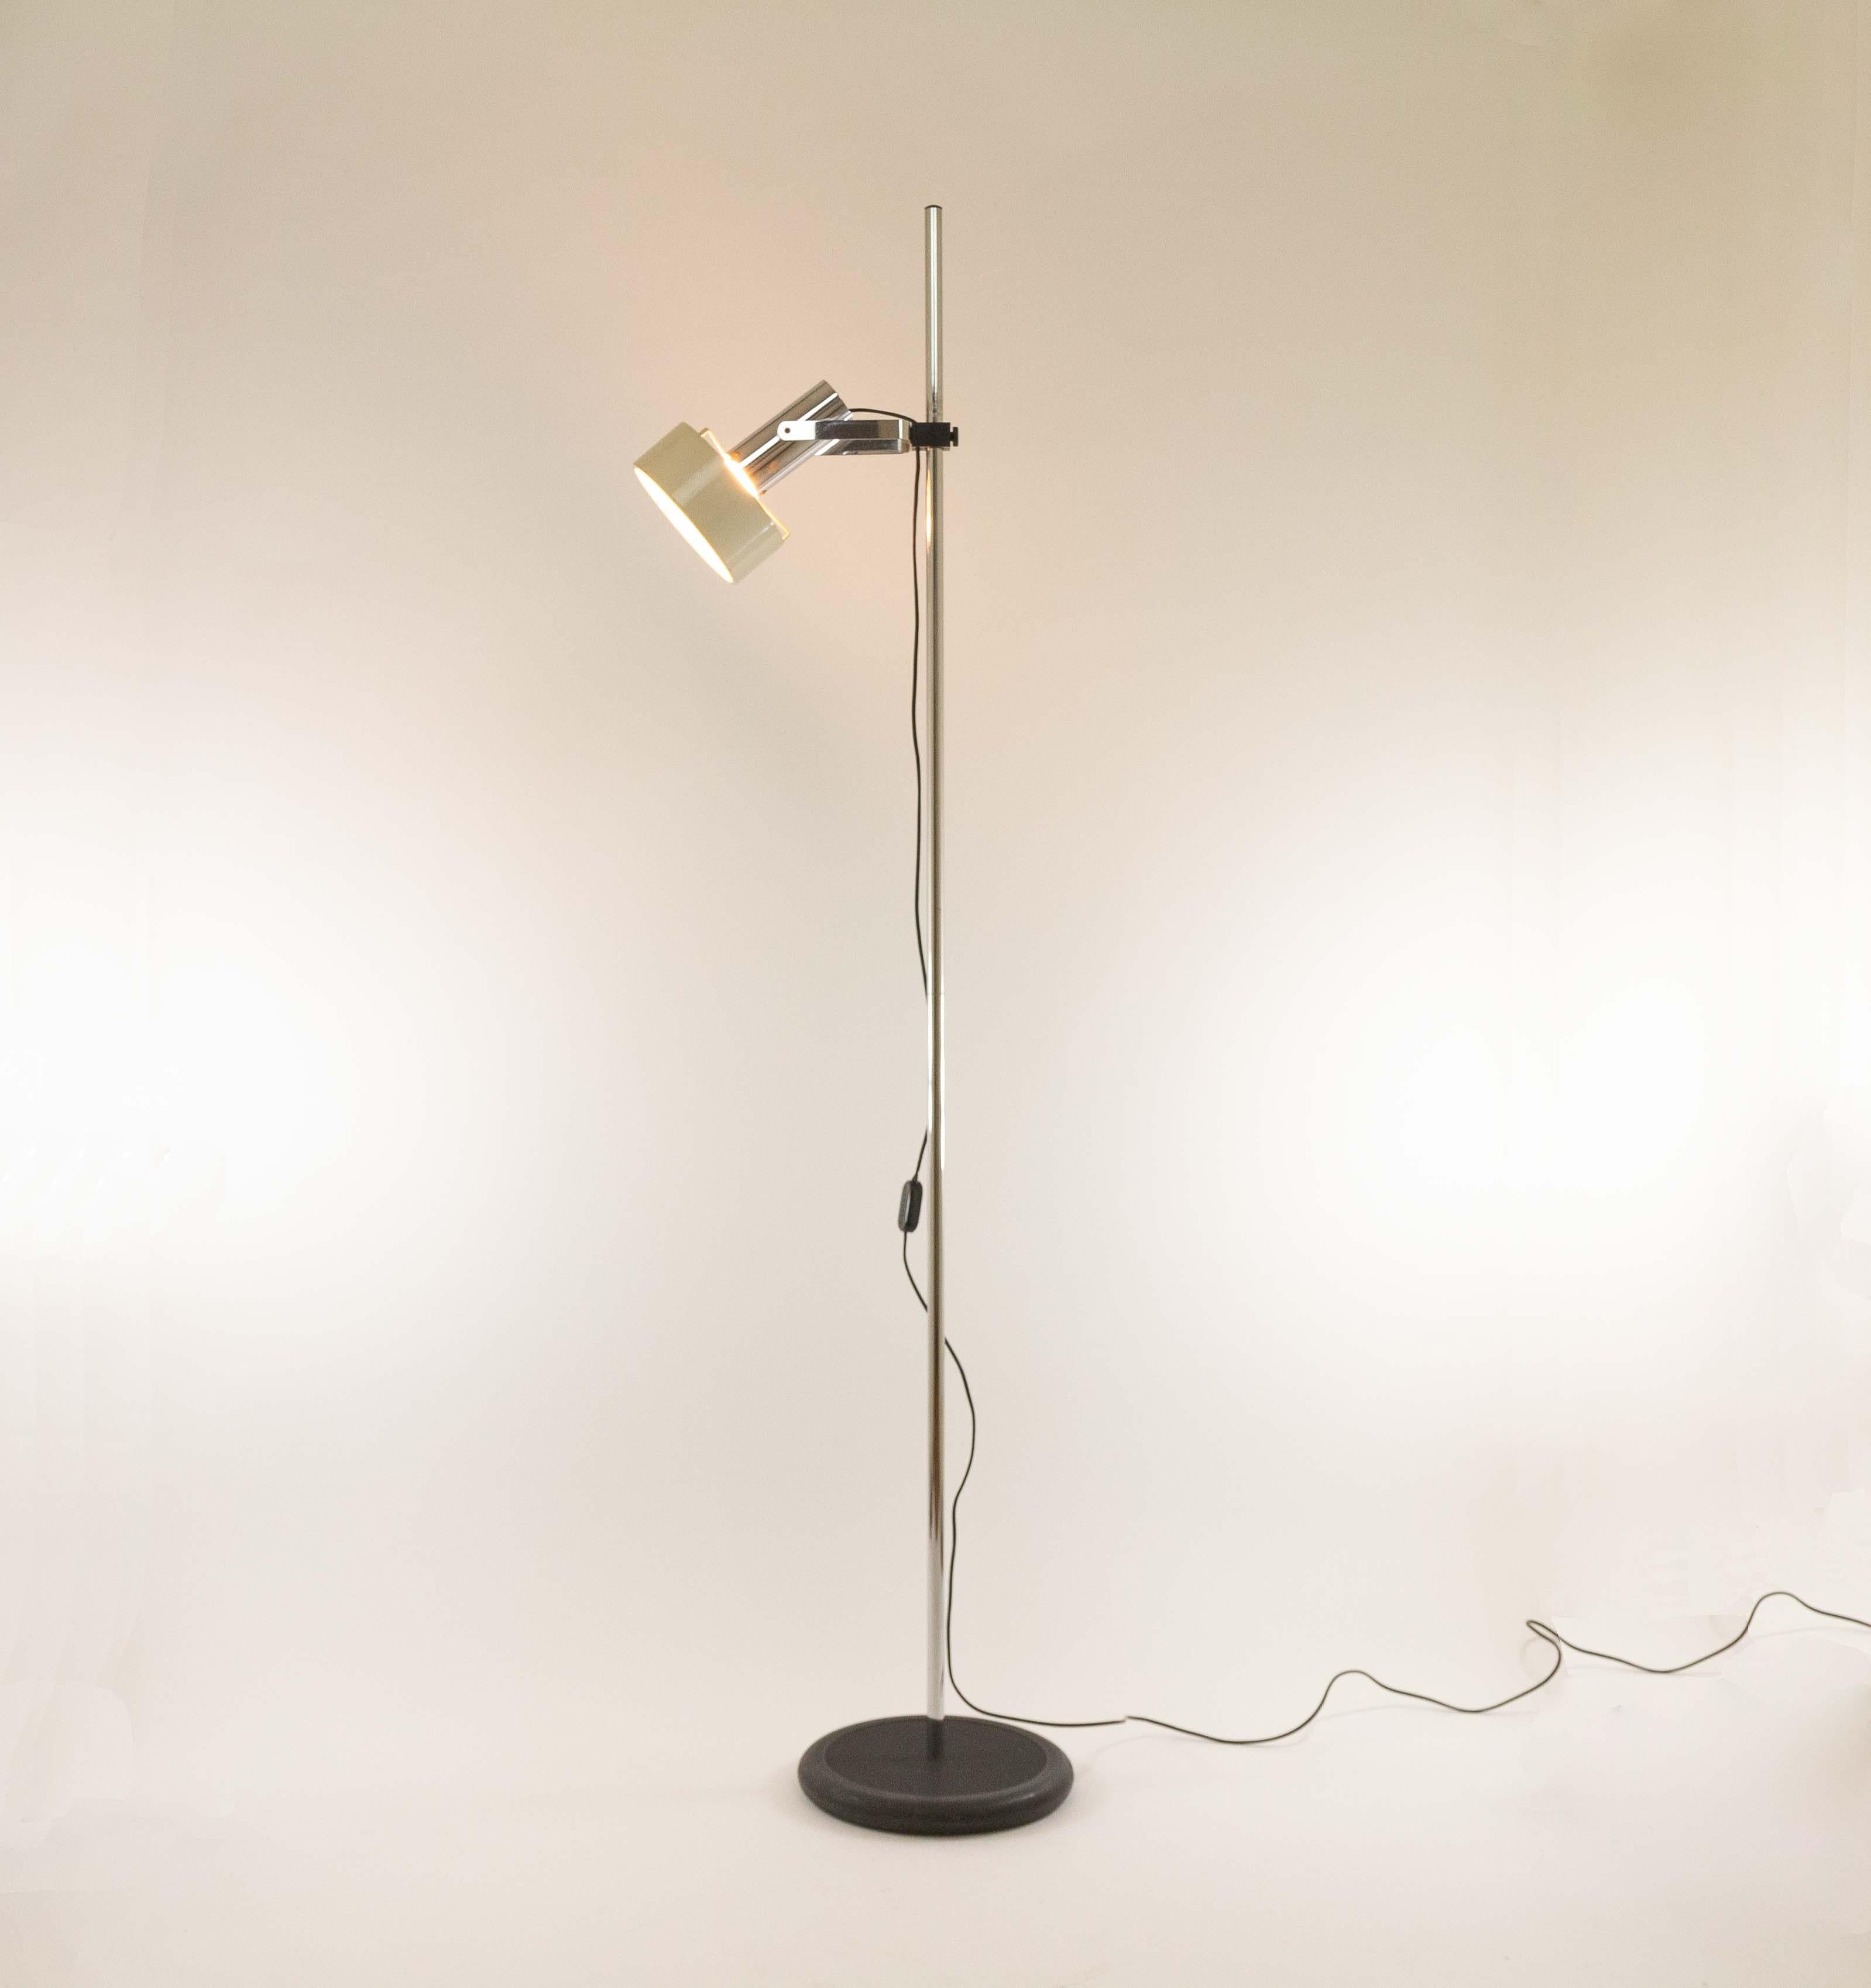 Italian Phon floor lamp model produced by Stilnovo in the 1960s.

The lamp consists of a partly white lacquered adjustable spot that can also be lowered, a relative heavy circular black plastic base and a chrome-plated metal structure.

The